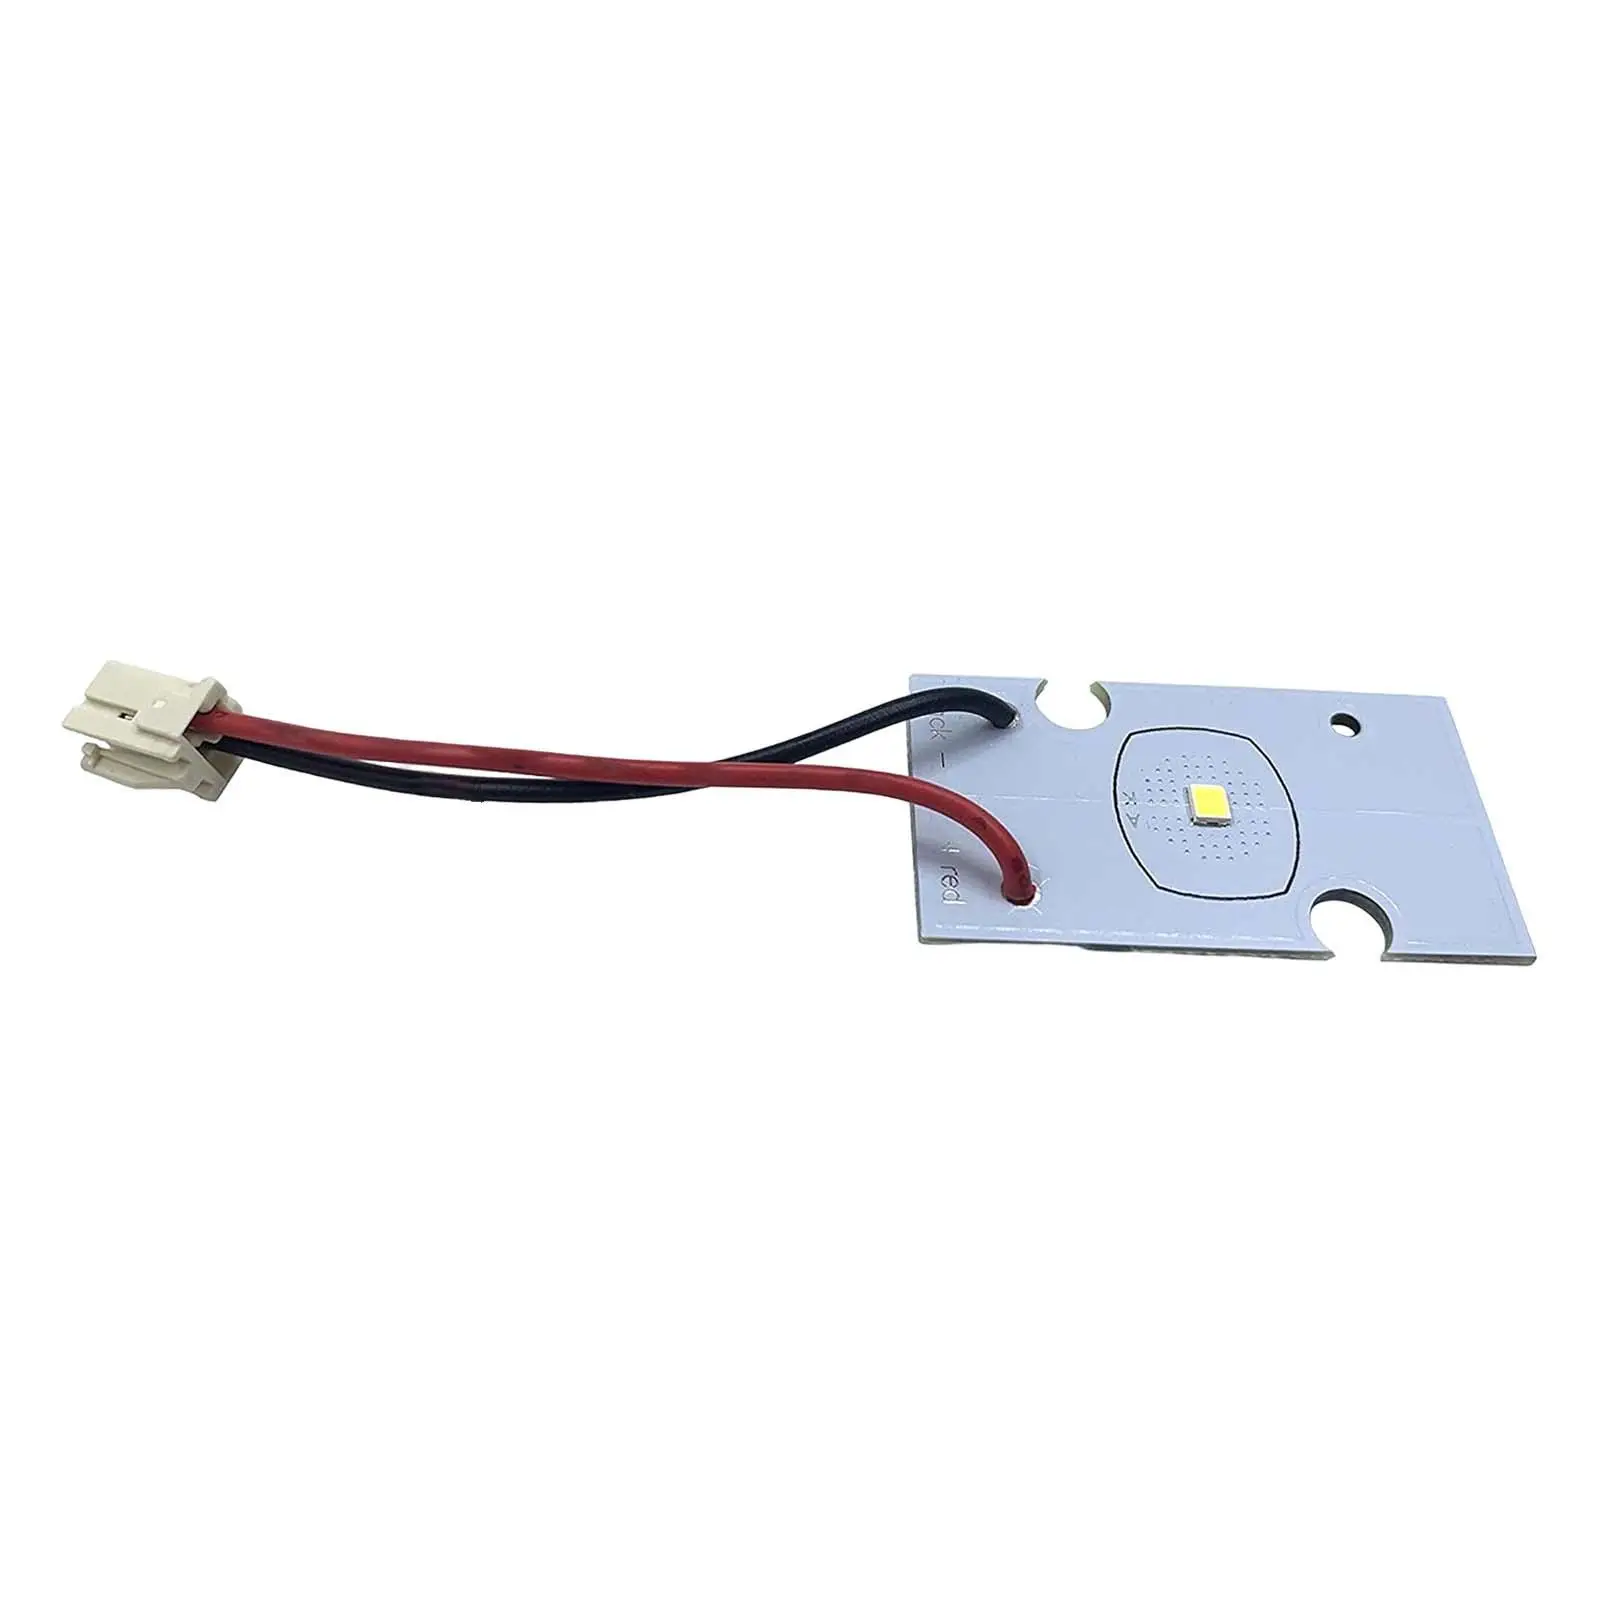 LED Light Easy to Install Portable Parts for Whirlpool Kenmore